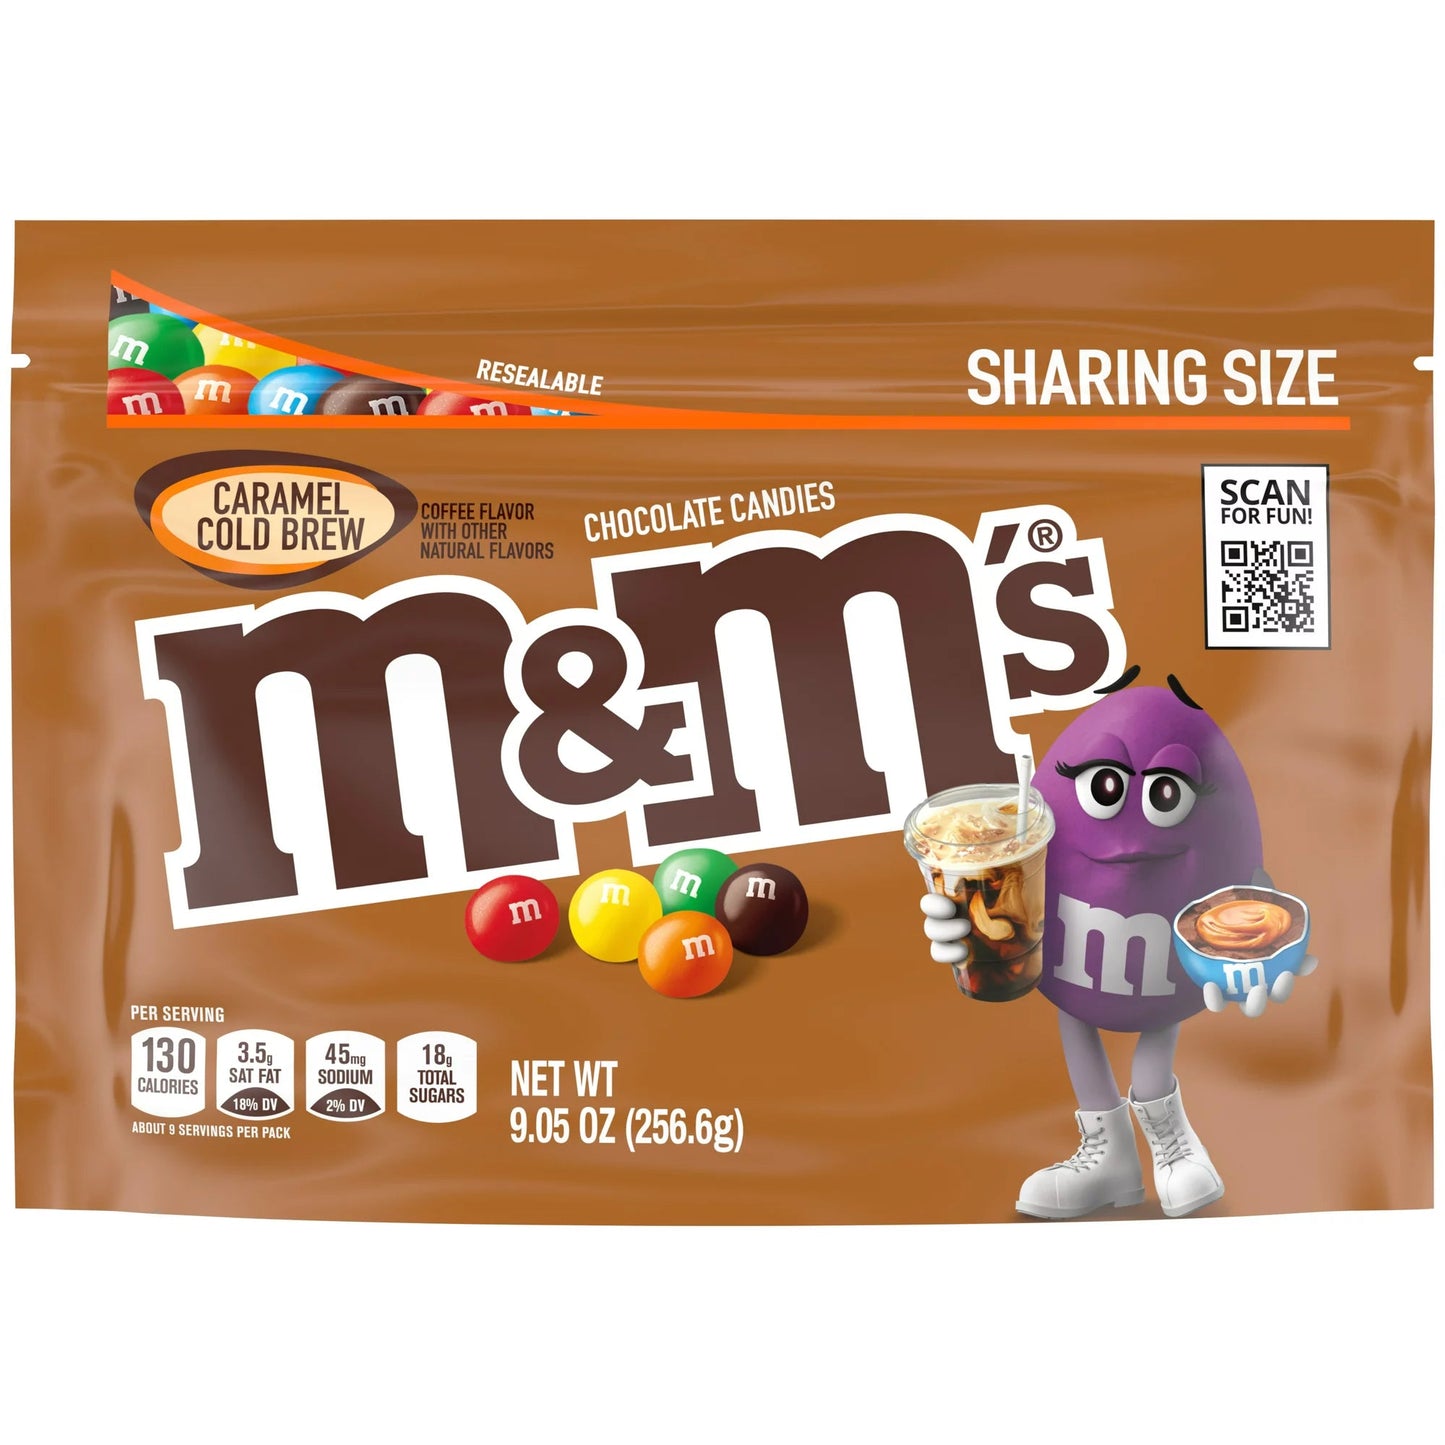 M&M’s Caramel Cold Brew Sharing Size - 256g